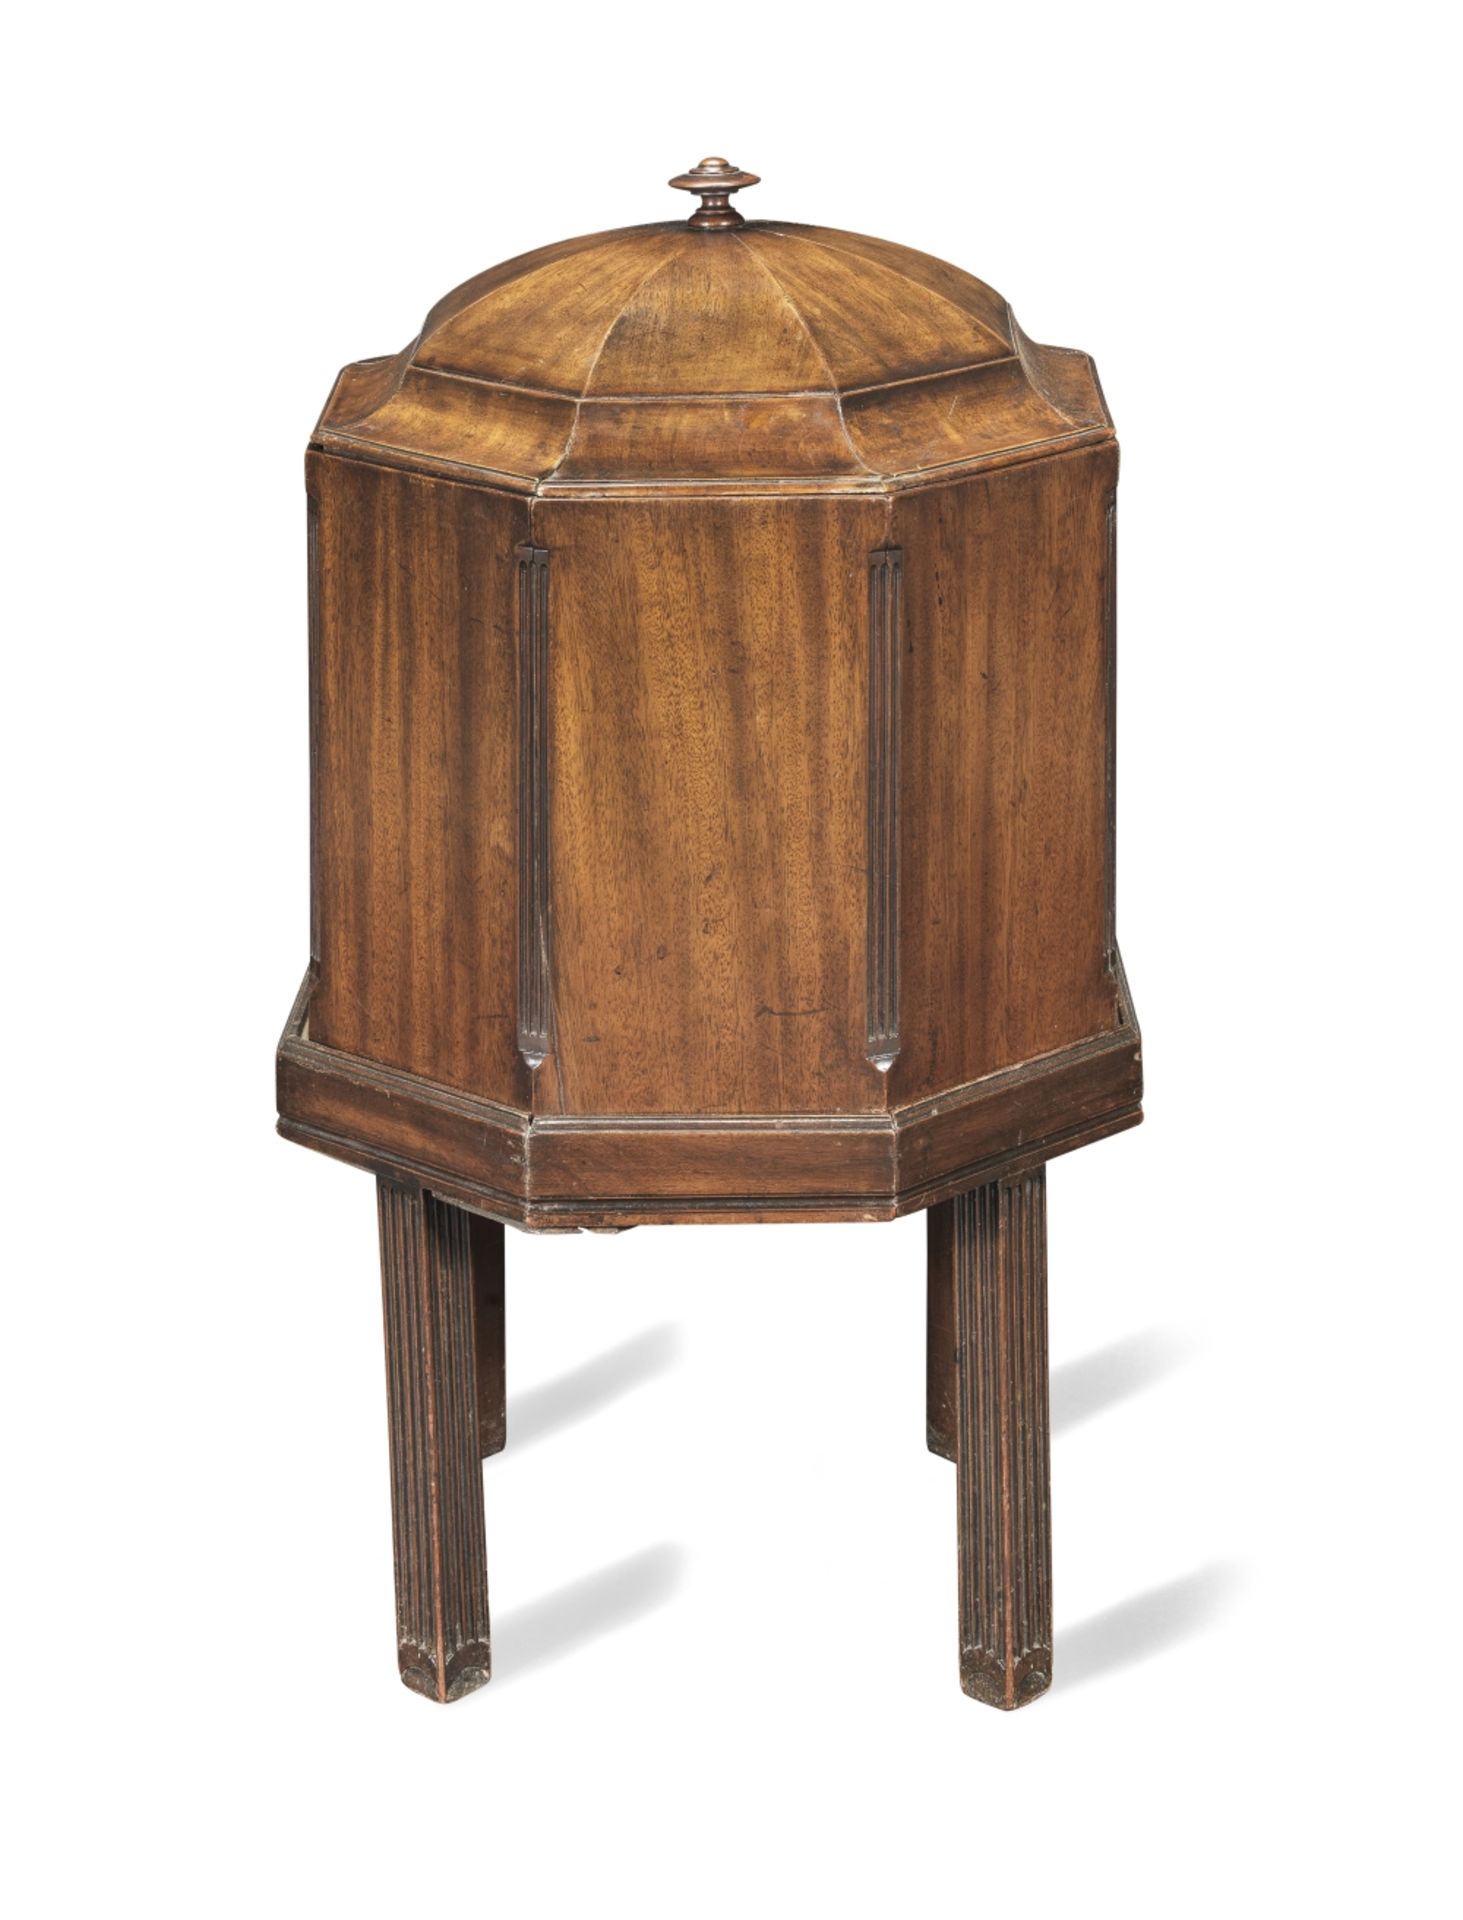 A 19th century mahogany octagonal cellaret in the George III style